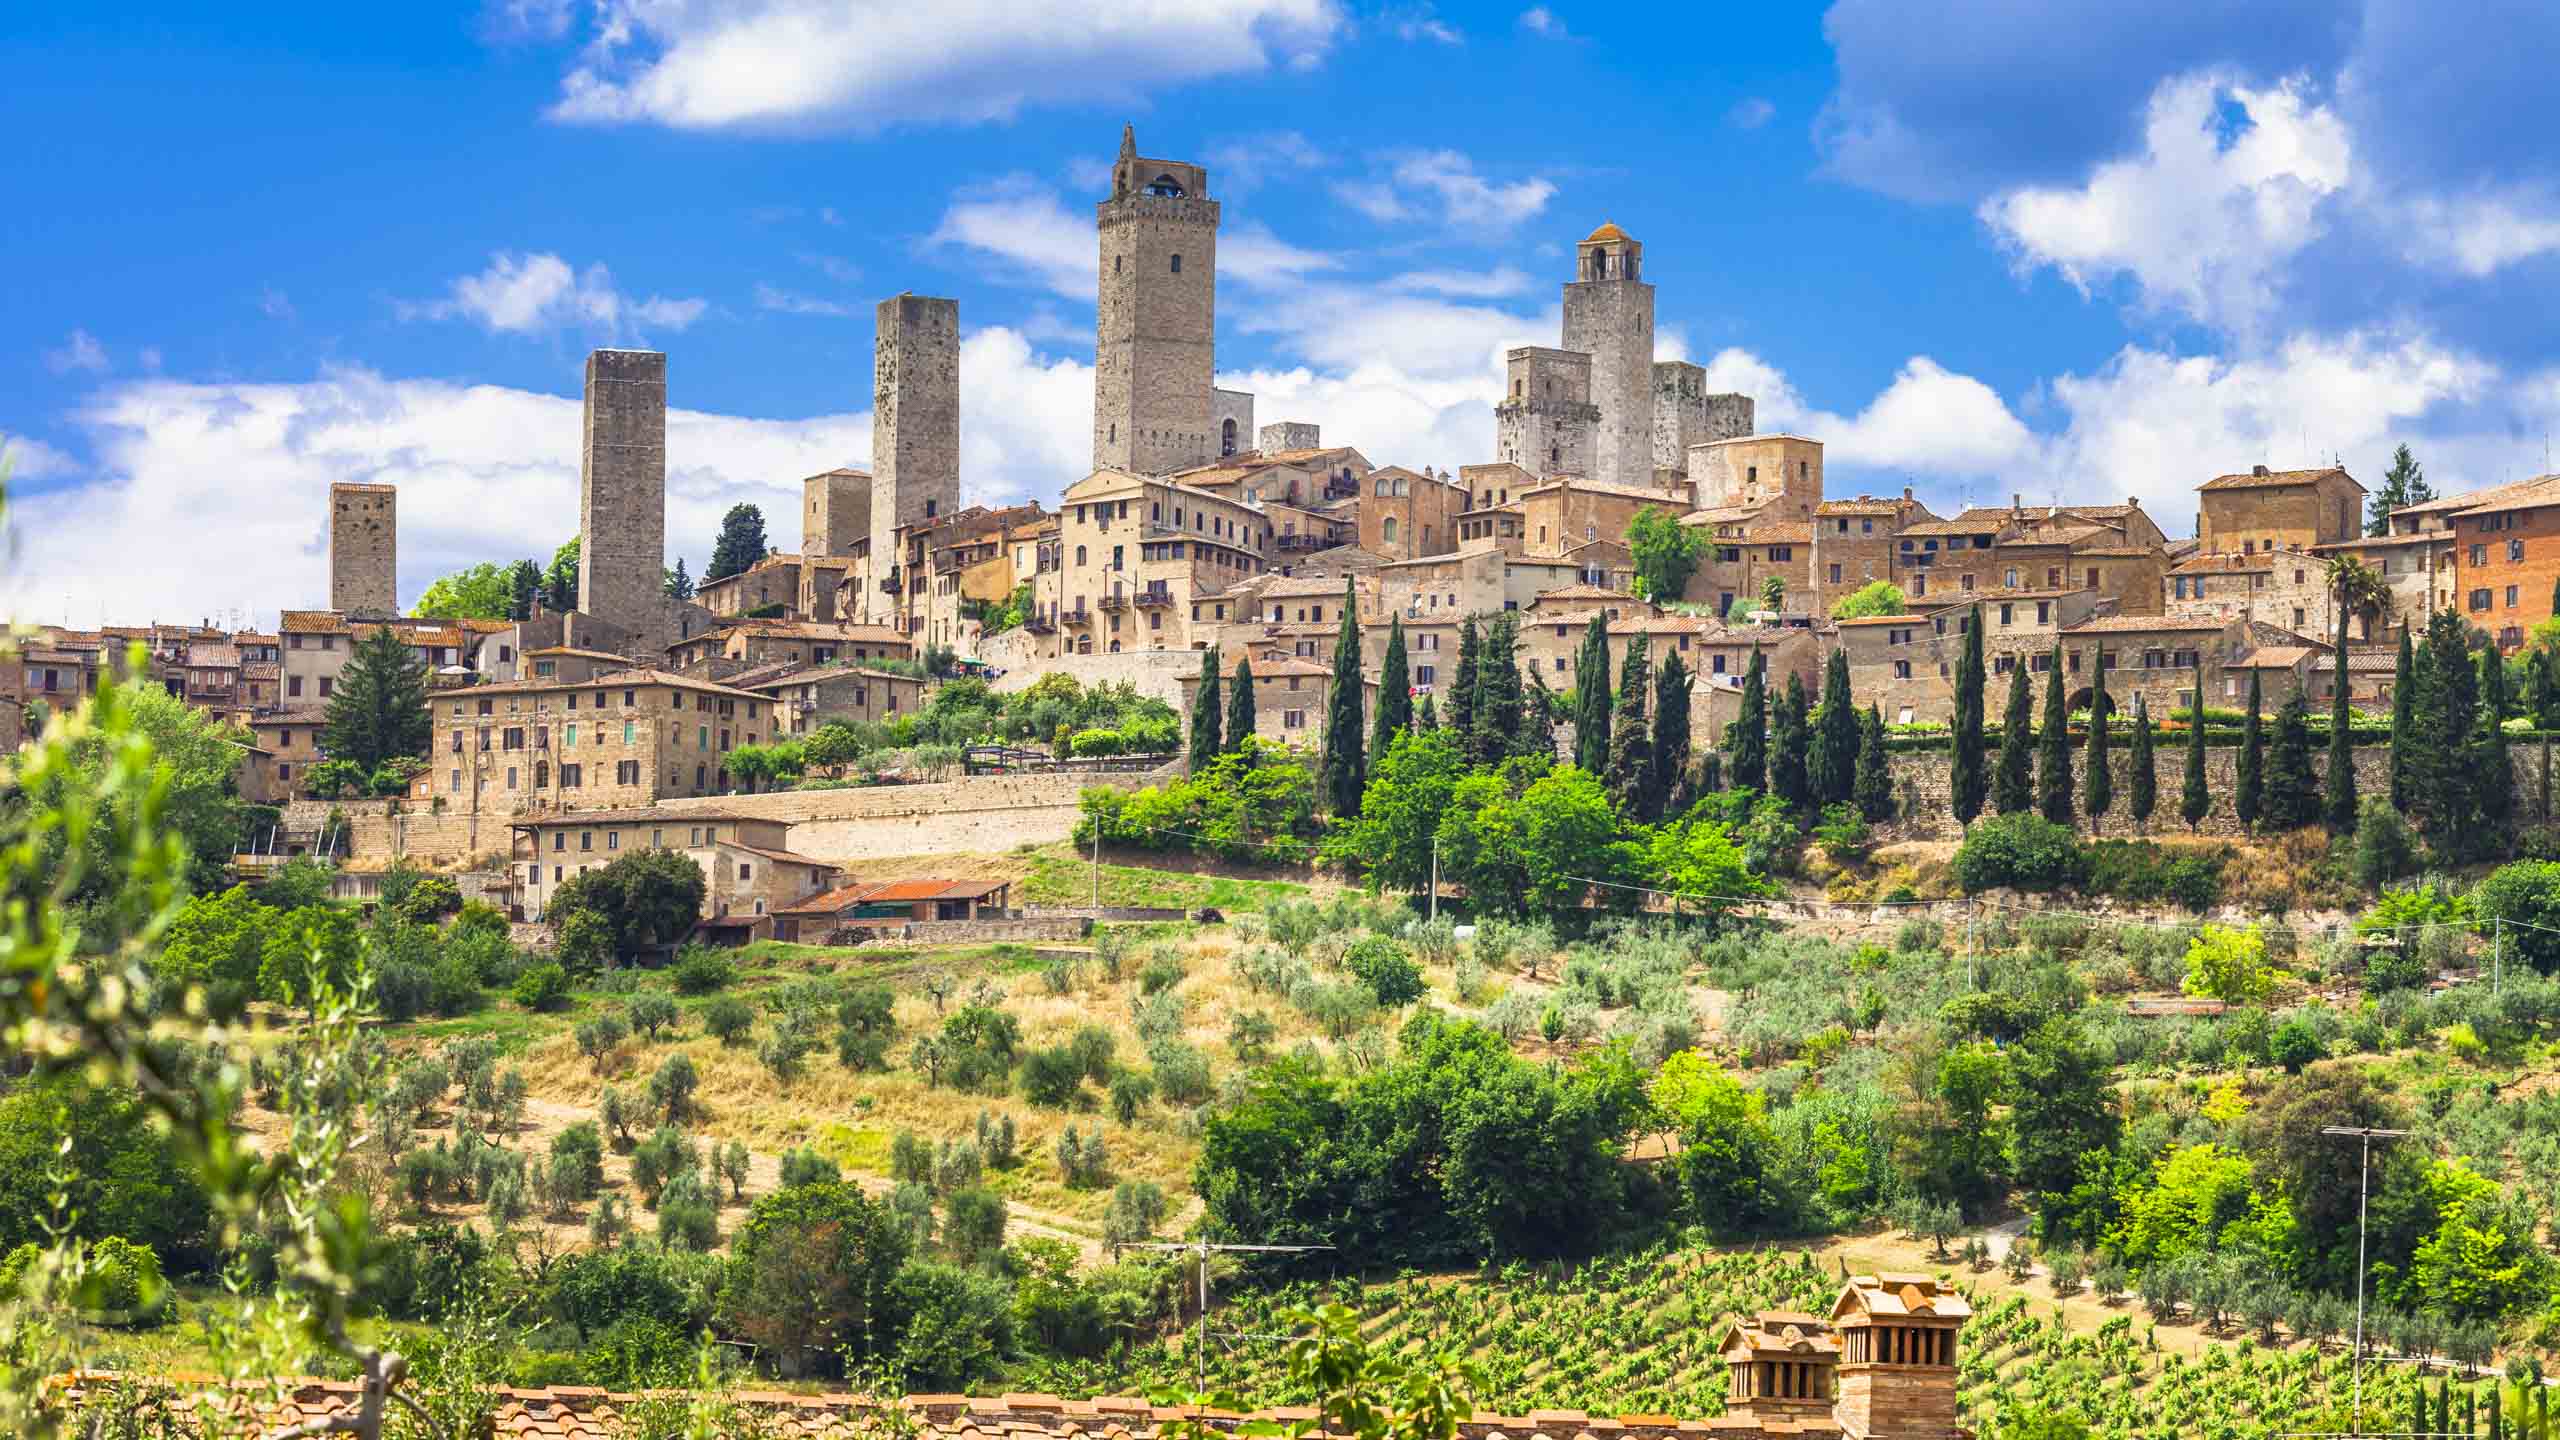 San Gimignano, Tuscany - 15 of the Prettiest Towns and Villages in Italy